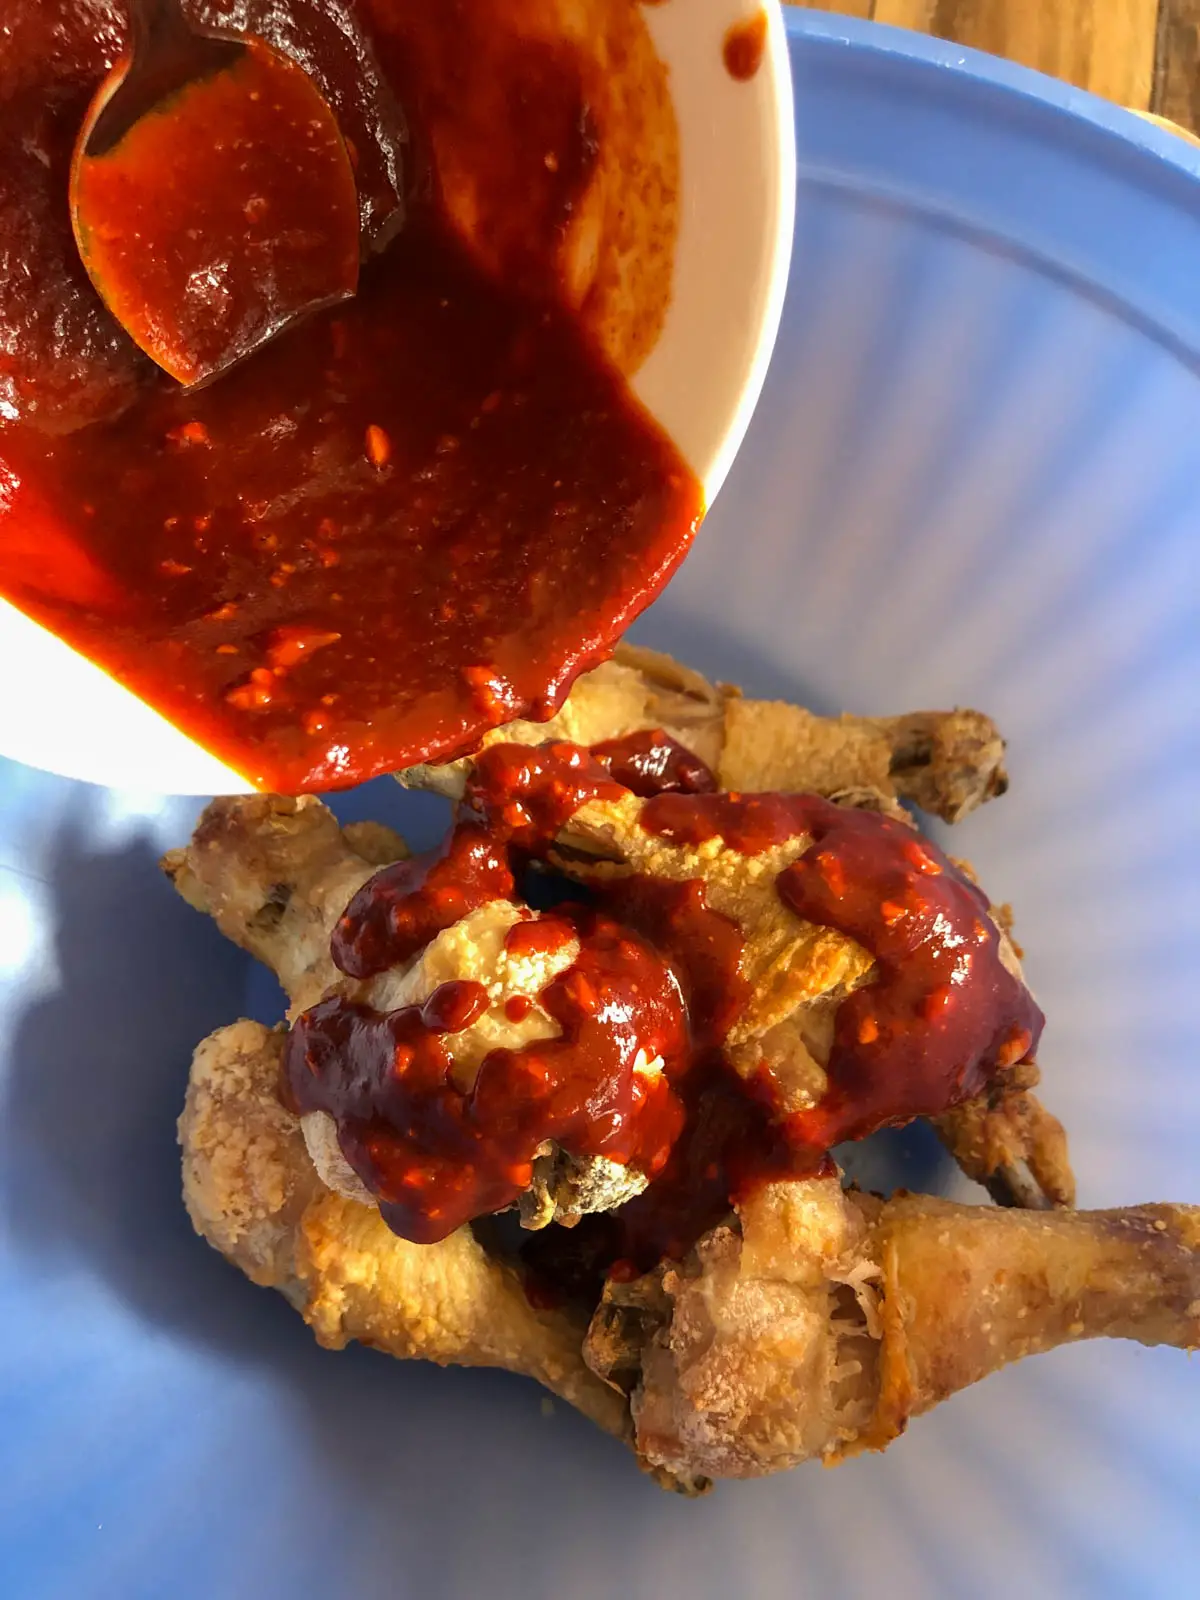 Baked chicken drumsticks in a blue bowl with gochujang based sauce being poured over them.